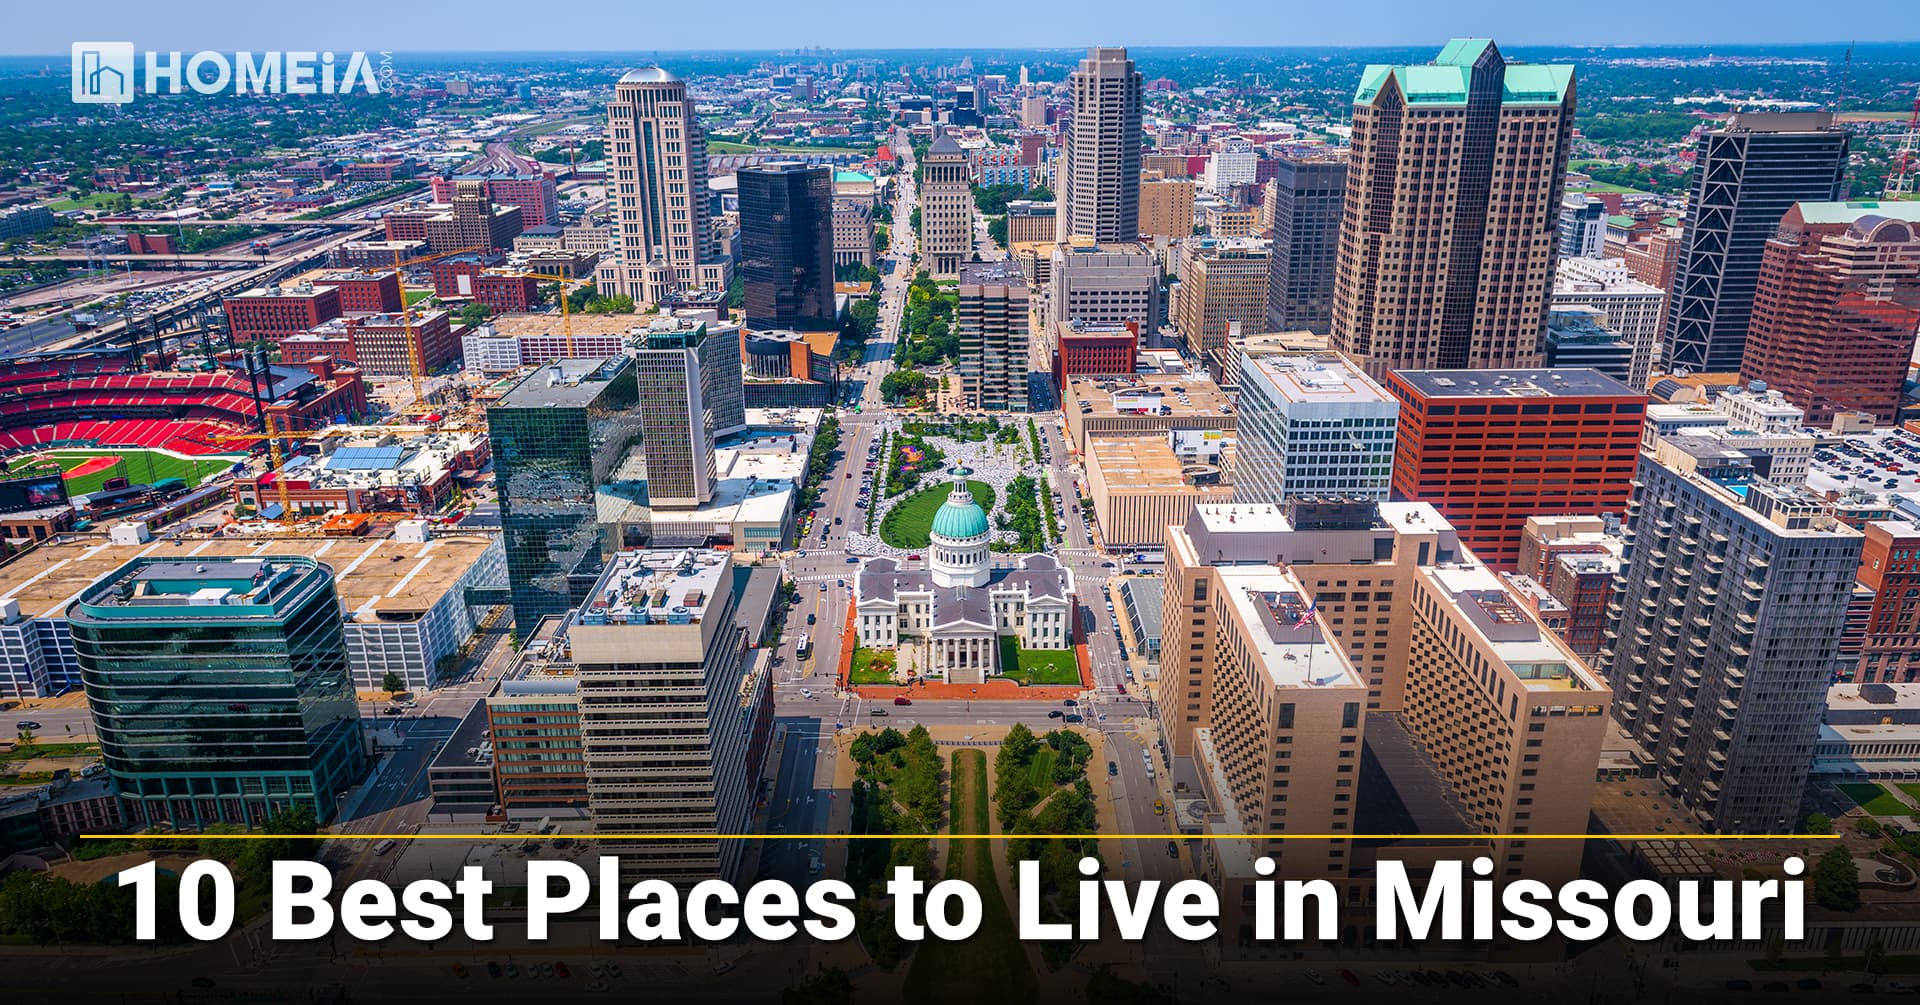 10 Best Places to Live in Missouri